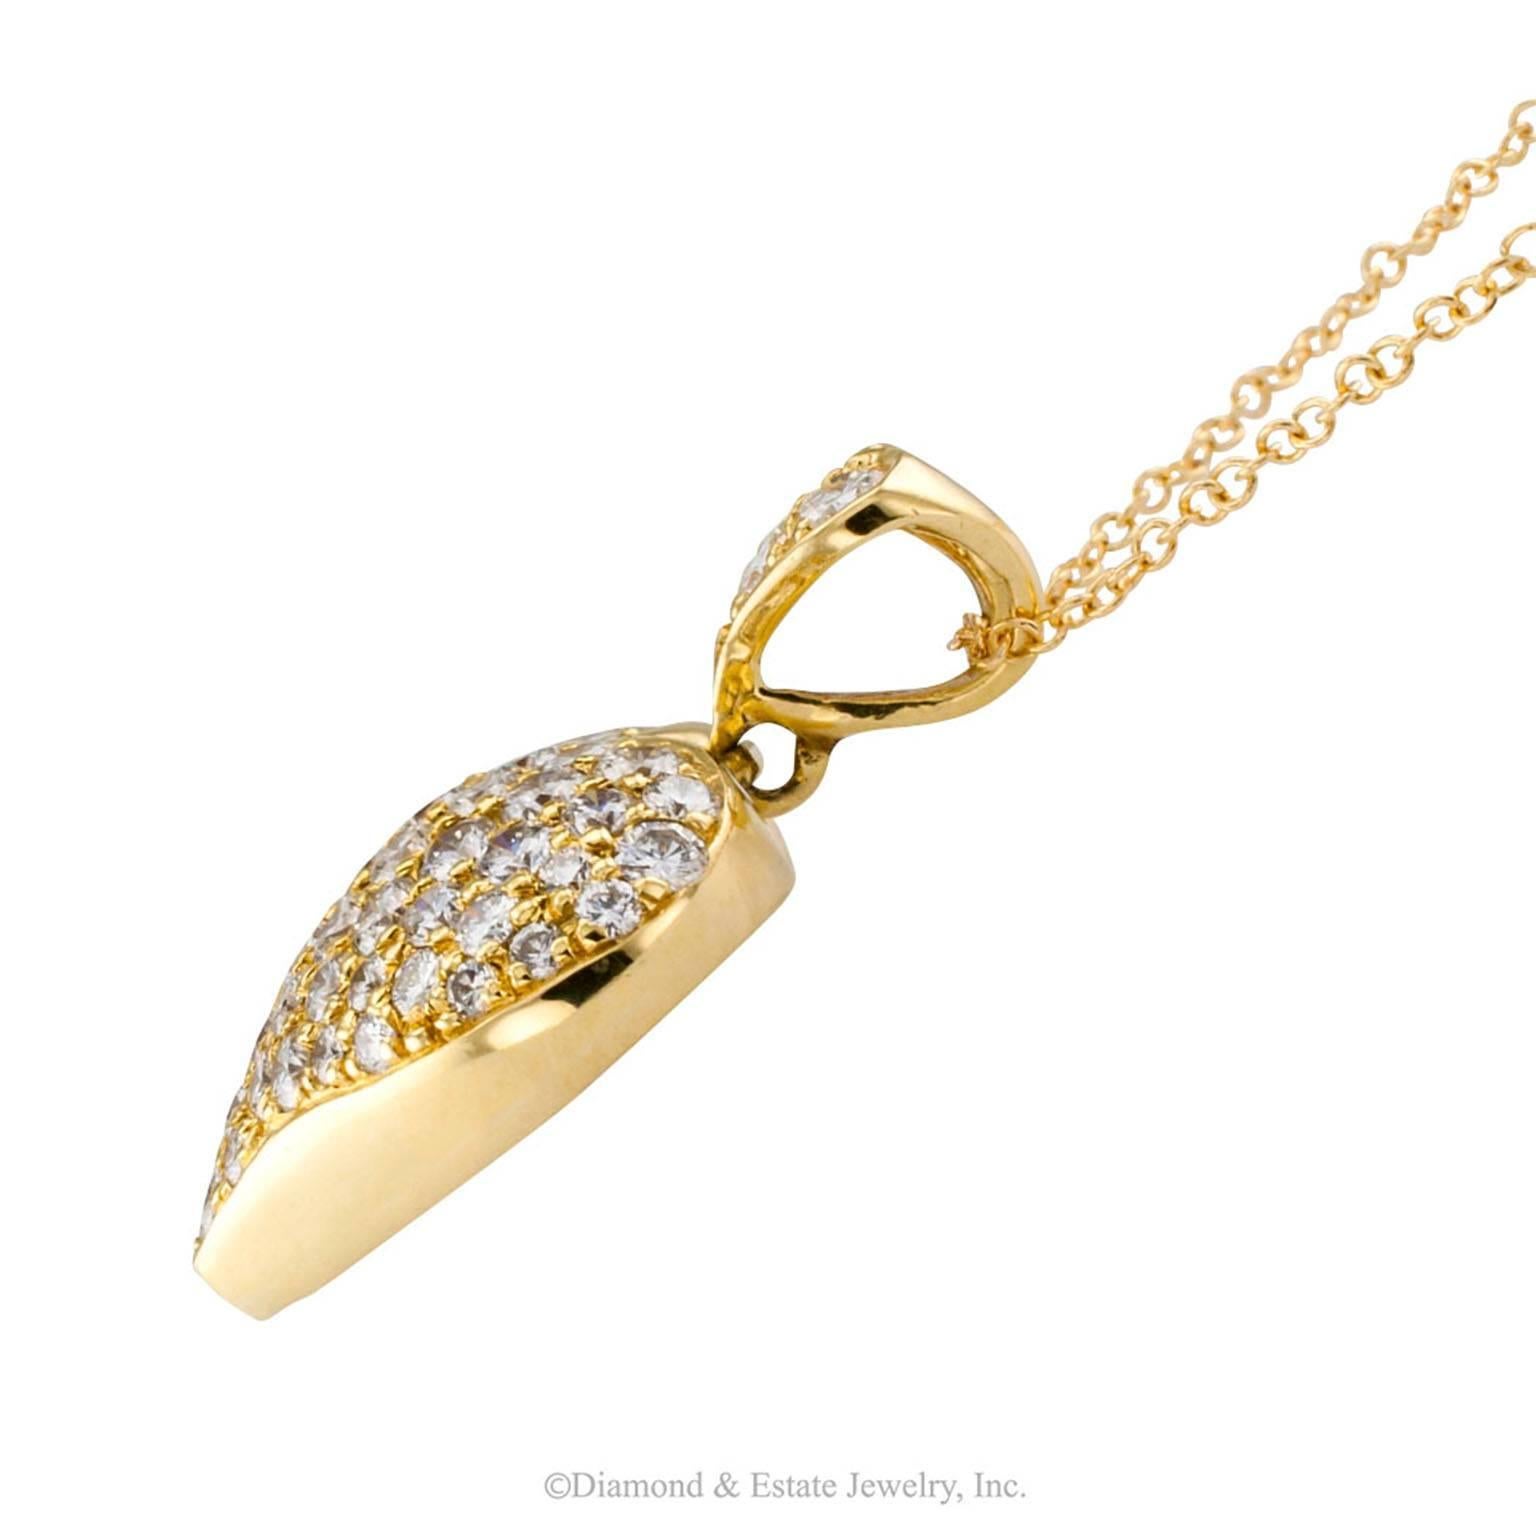 Heart-shaped Diamond Pave Pendant

Estate diamond-pave heart-shaped gold pendant.  It is worth while noting that this lovely heart-shaped pendant is brimming with attention to detail, high quality workmanship and materials. Notice the closed pierced